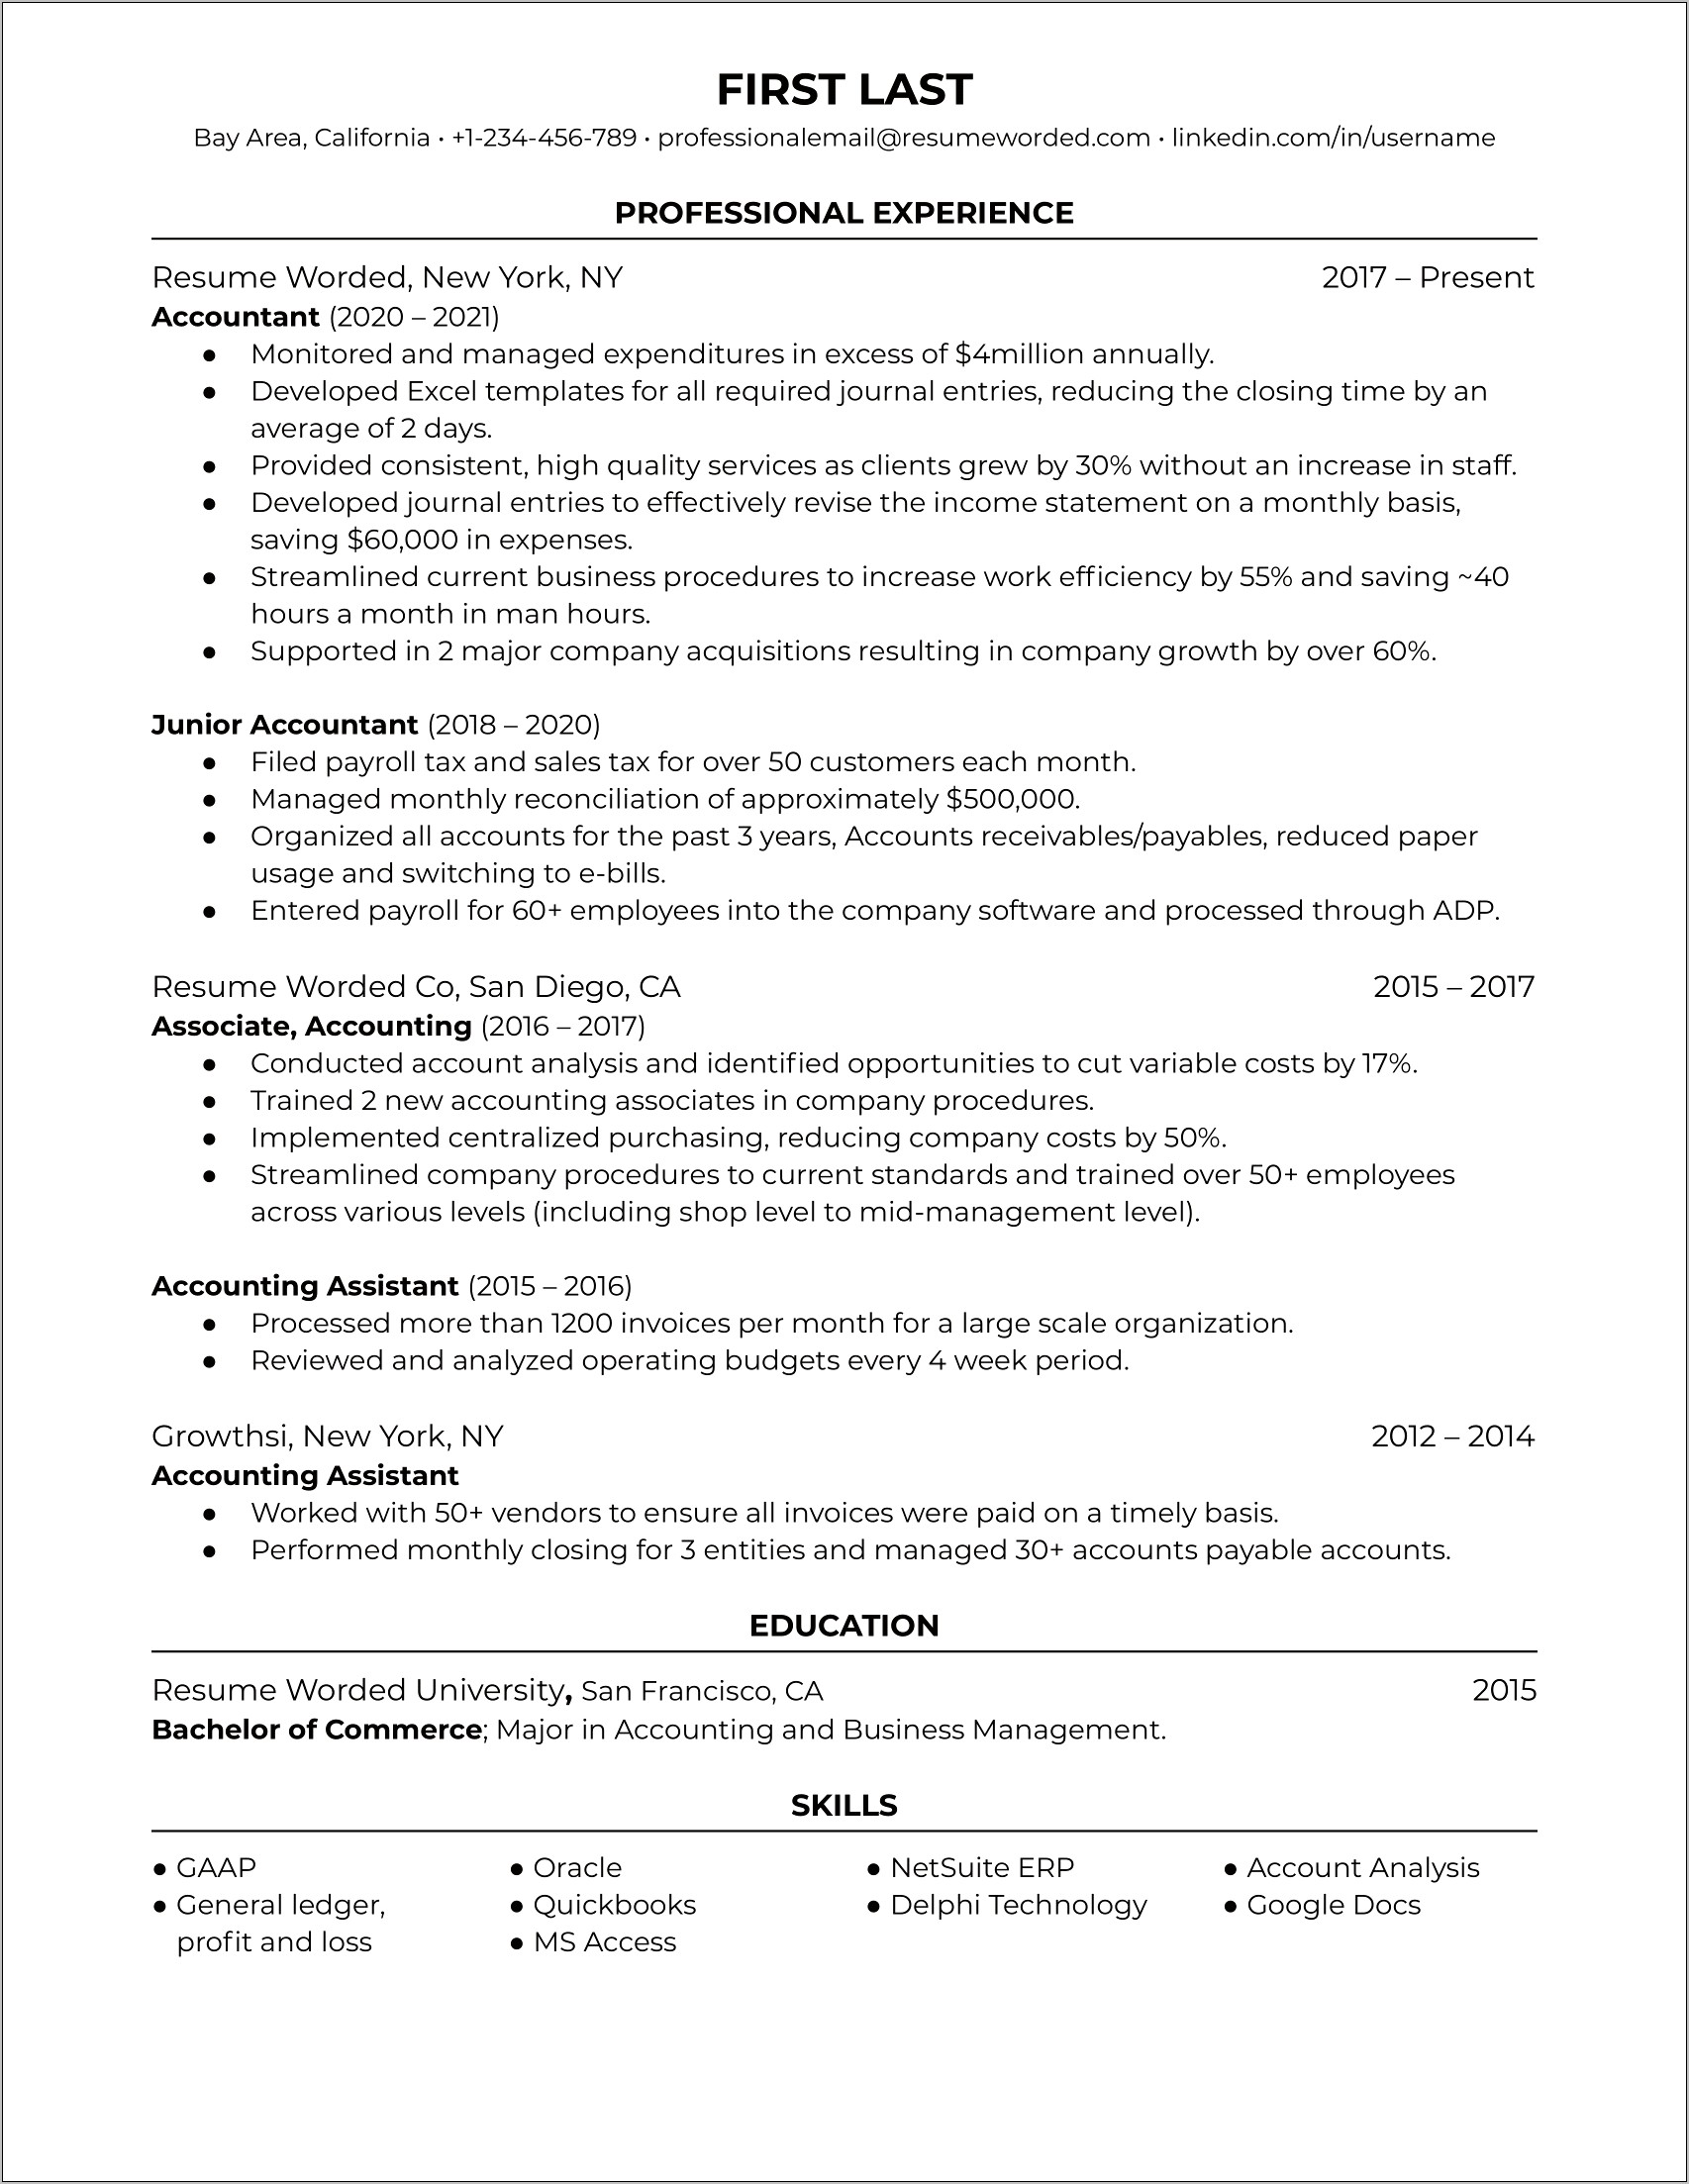 Sample Resume Professional Profile Example Accounting